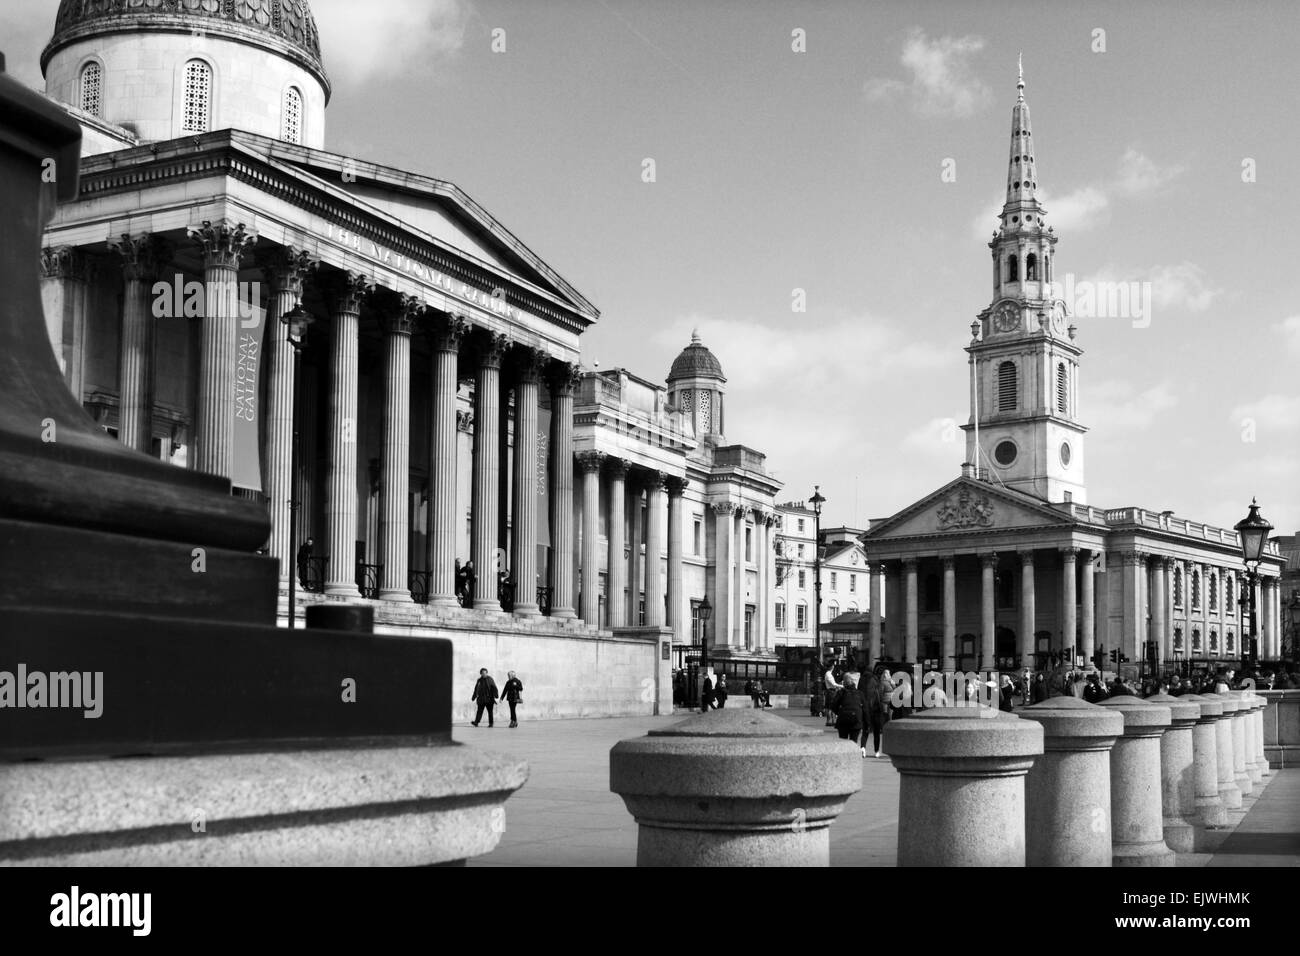 A view of Trafalgar Square, including The National Gallery and St Martin In The Fields church. Stock Photo